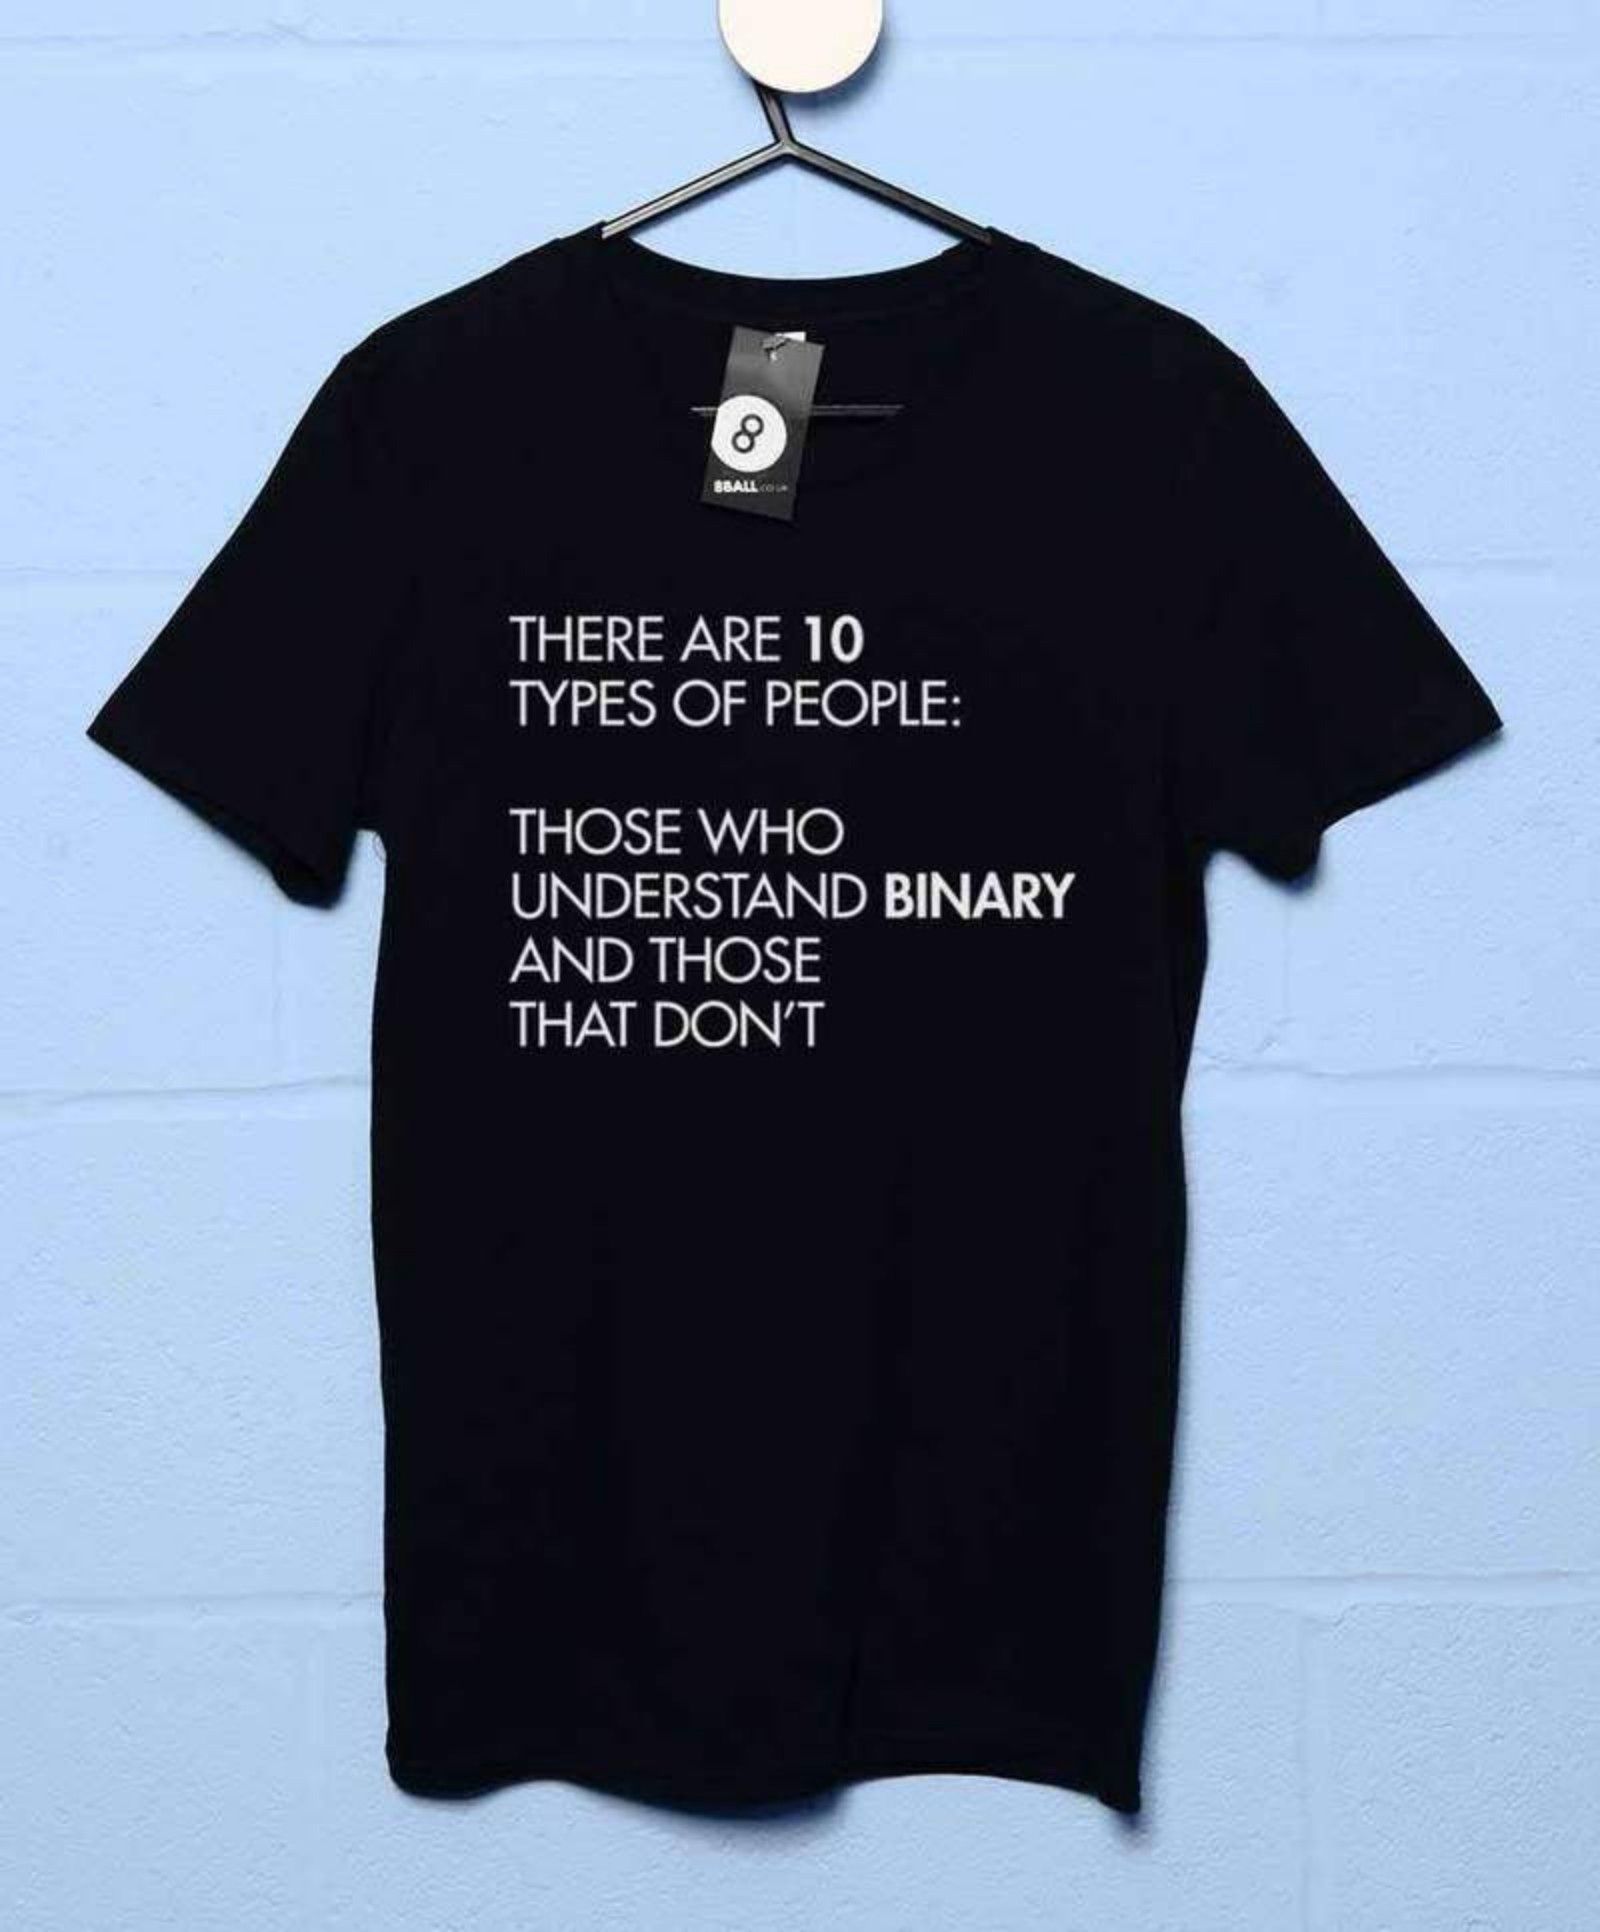 Best Geek T-shirts Top Shirt Wear For The Ultimate Nerds image 14